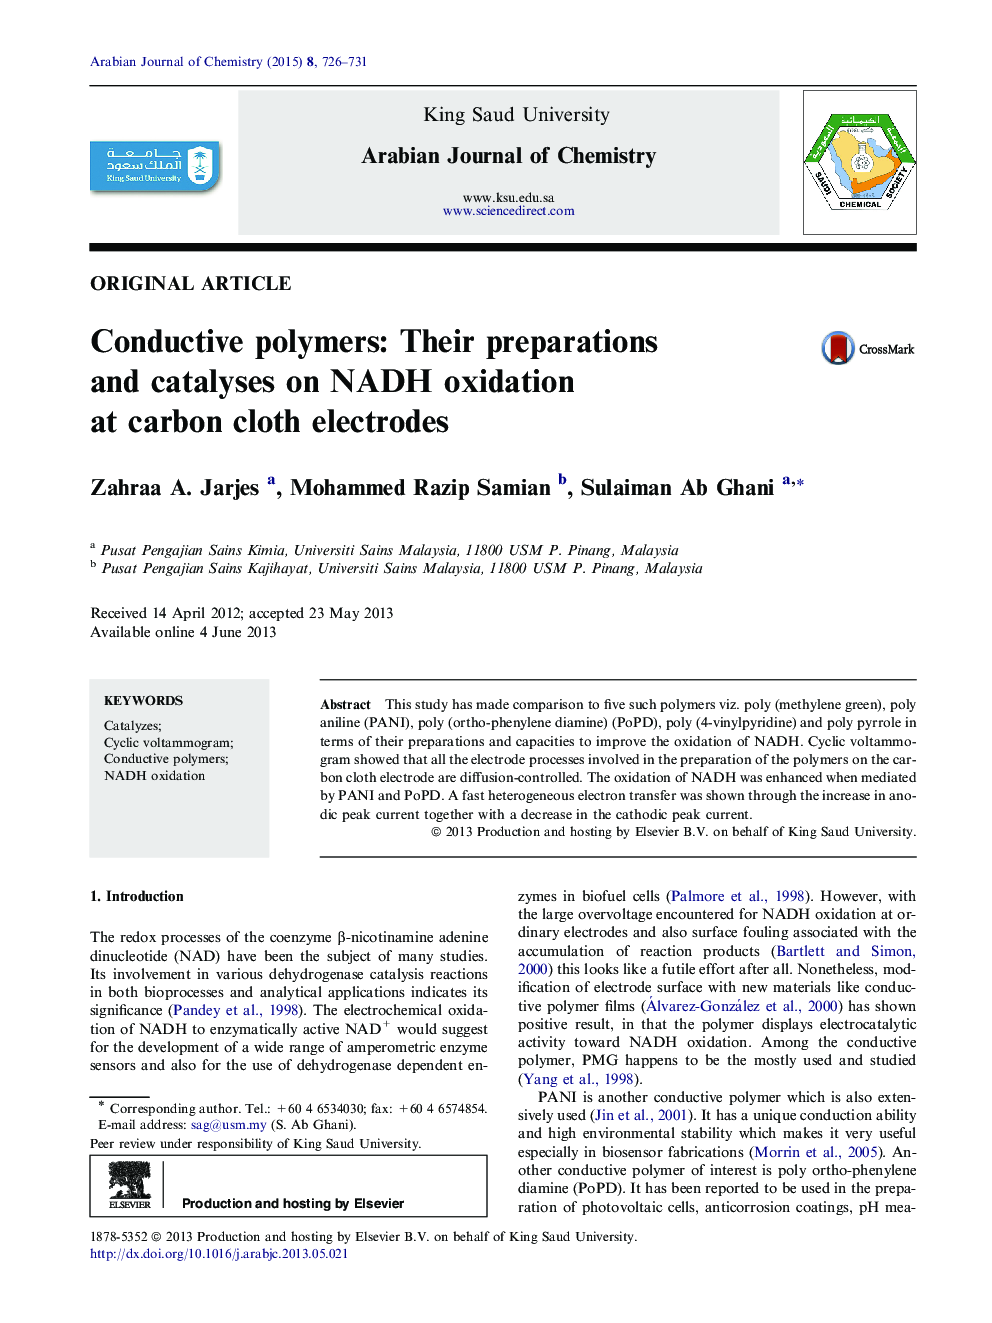 Conductive polymers: Their preparations and catalyses on NADH oxidation at carbon cloth electrodes 